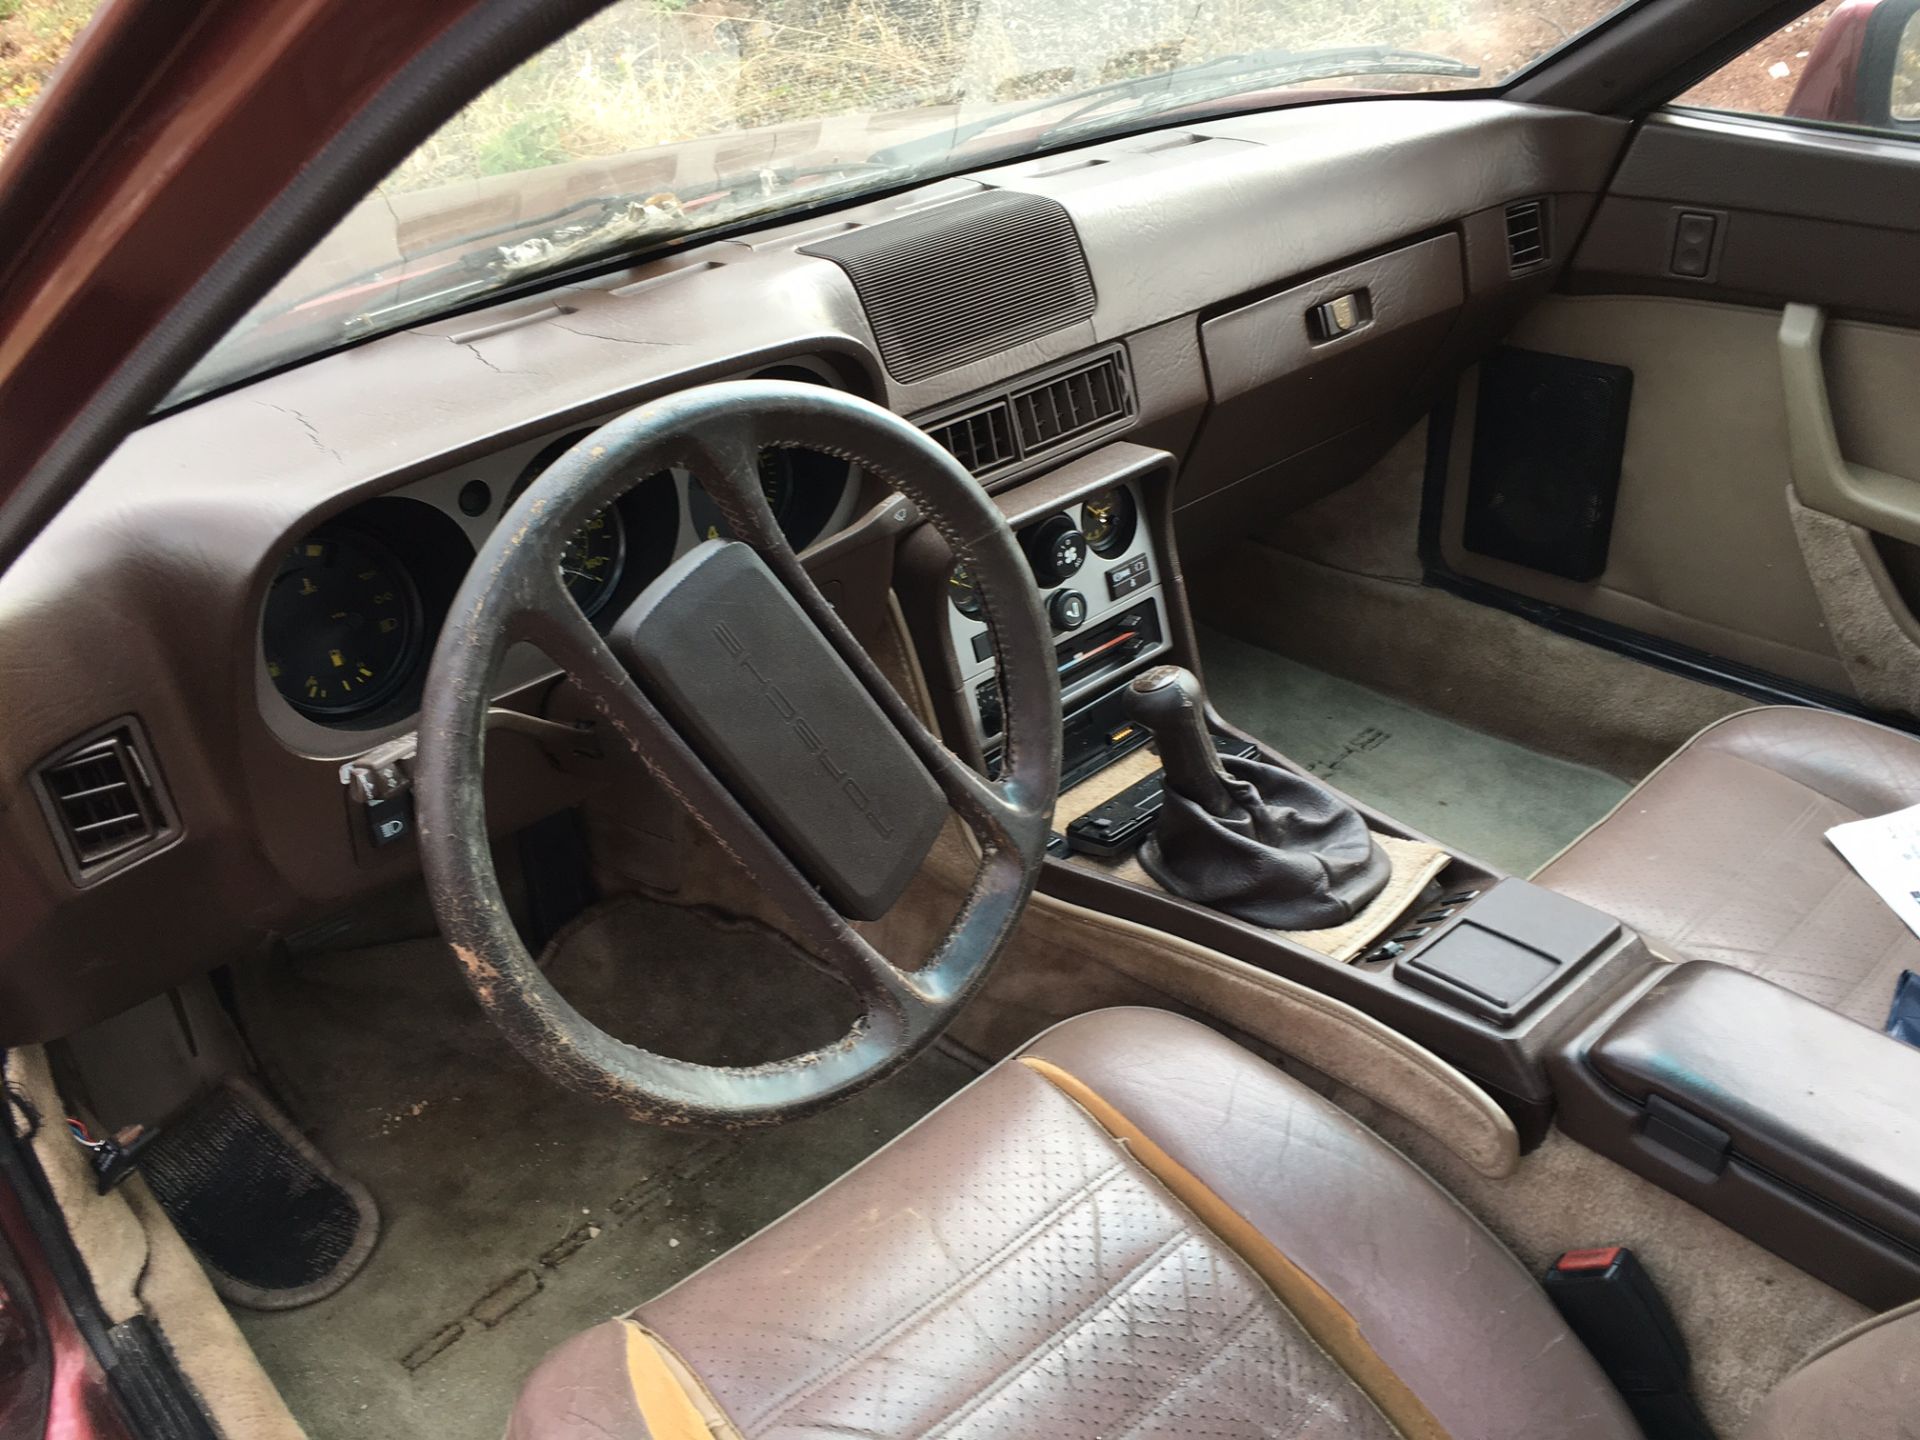 (1984) PORSCHE 944 VIN#: WP0AA0948EN461206; 5 SPEED MANUAL TRANSMISSION, RUNNING CONDITION - Image 6 of 12